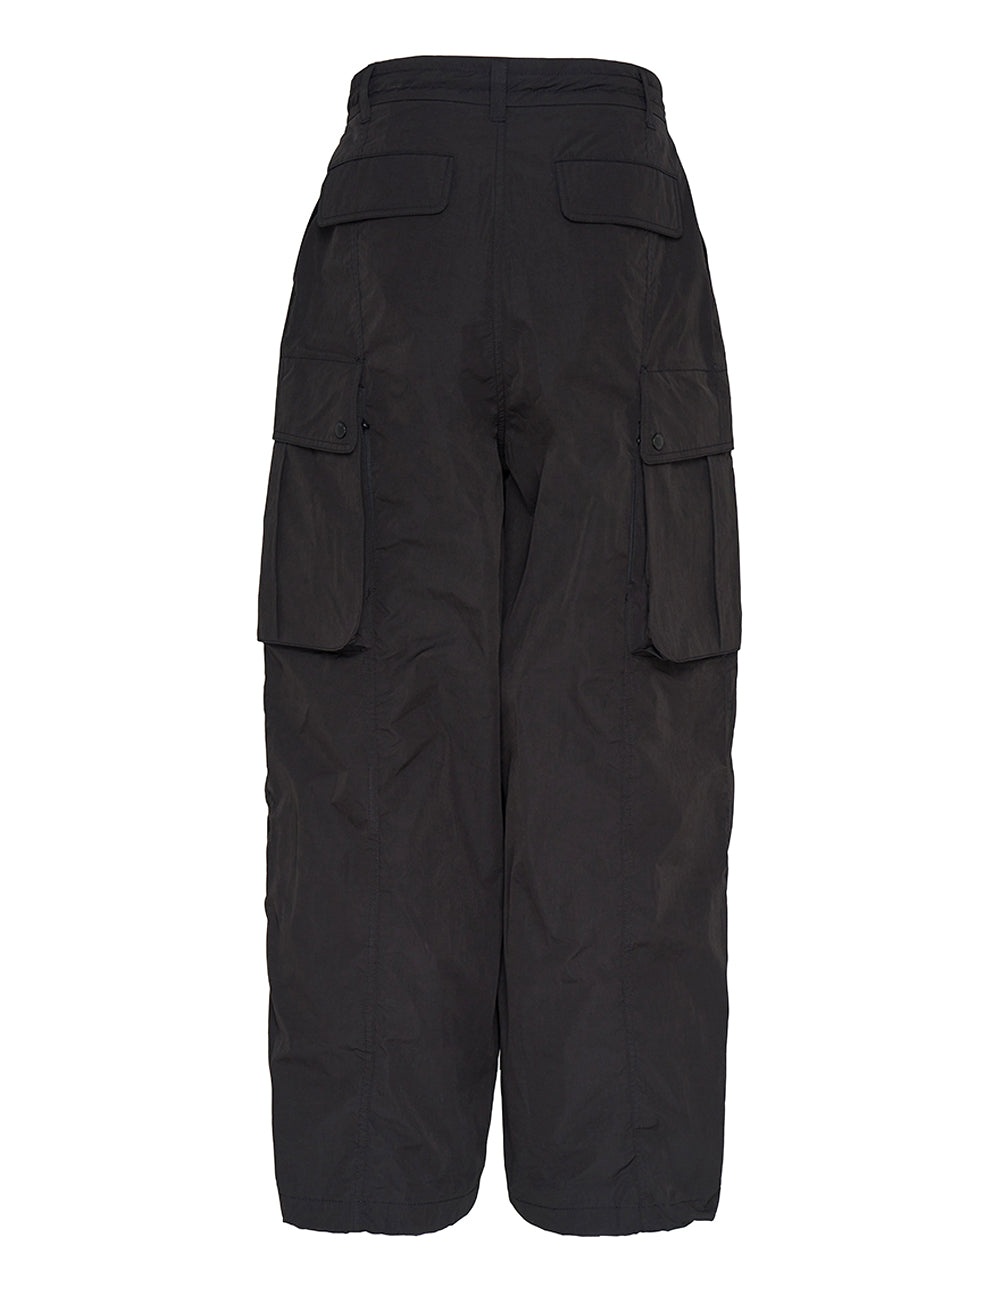 Mens Pants With Pockets - 2